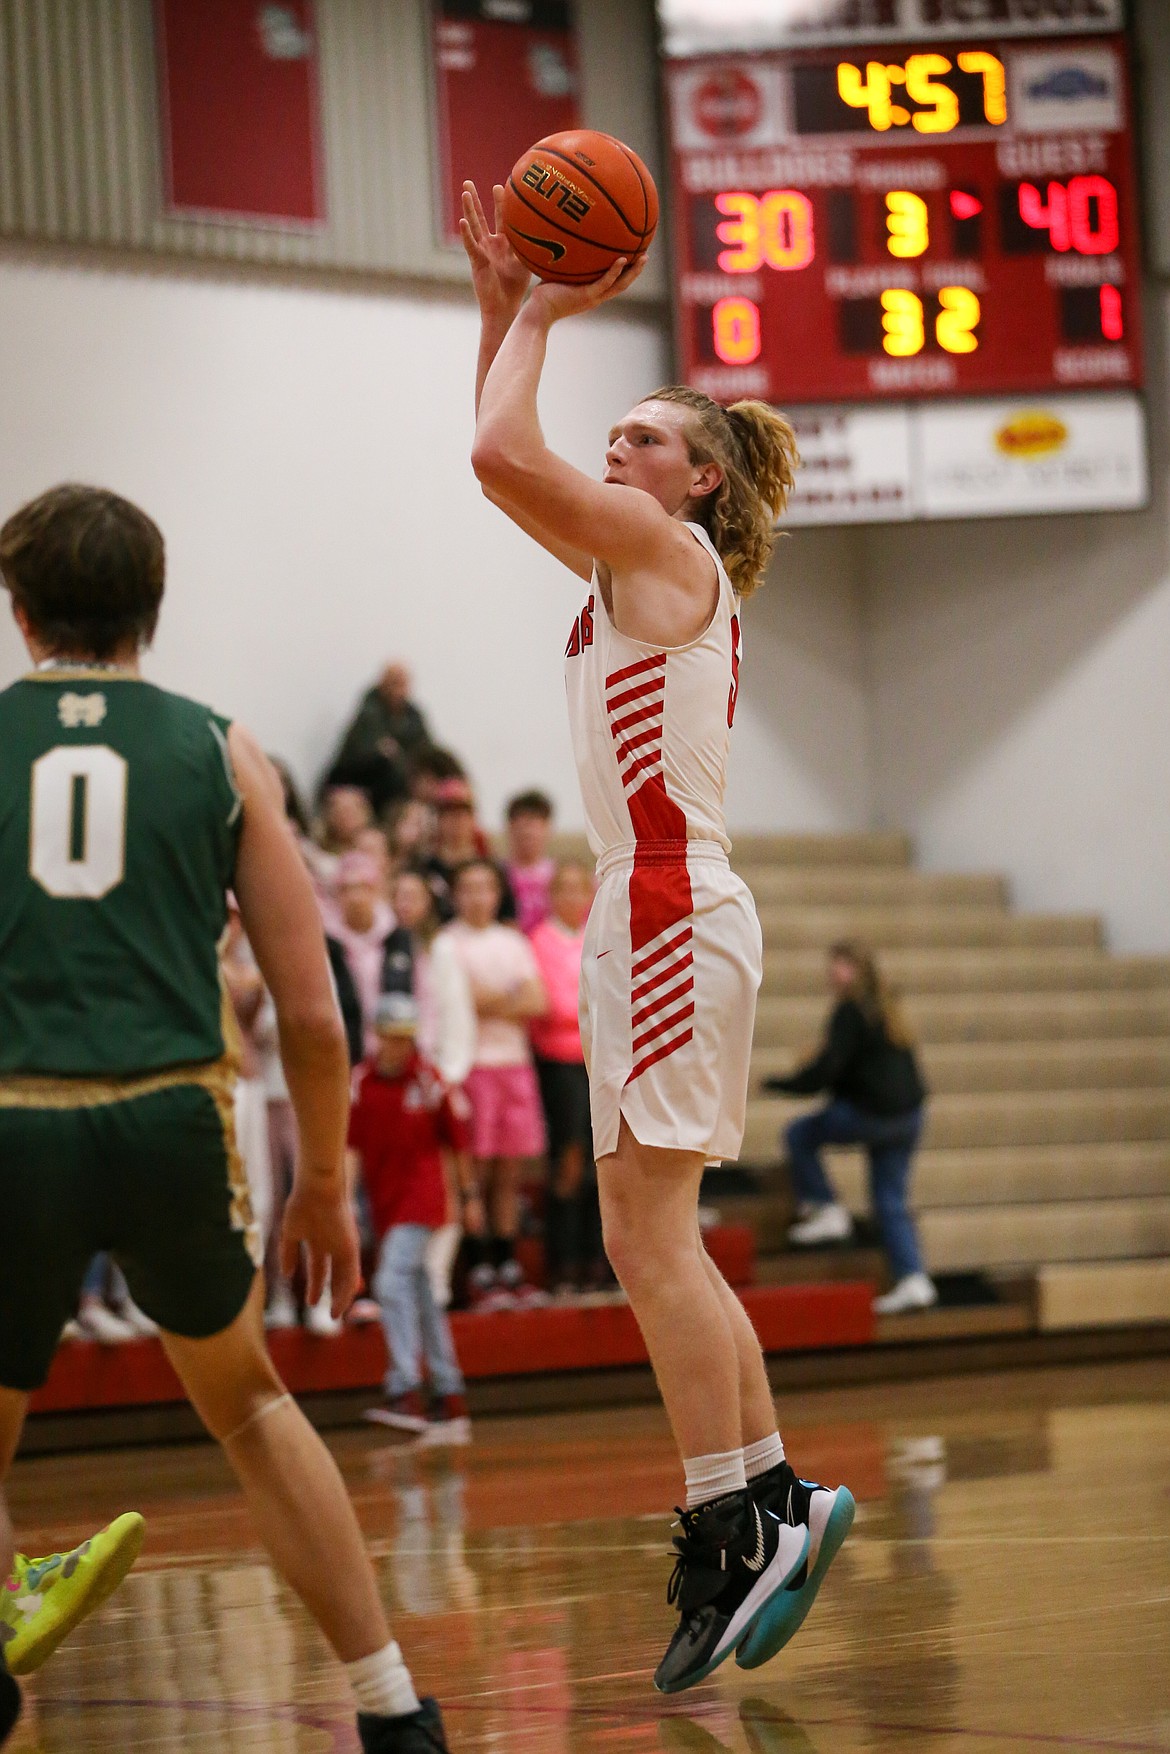 Jacob Eldridge rises up for a jumper during the second half of Tuesday's game.